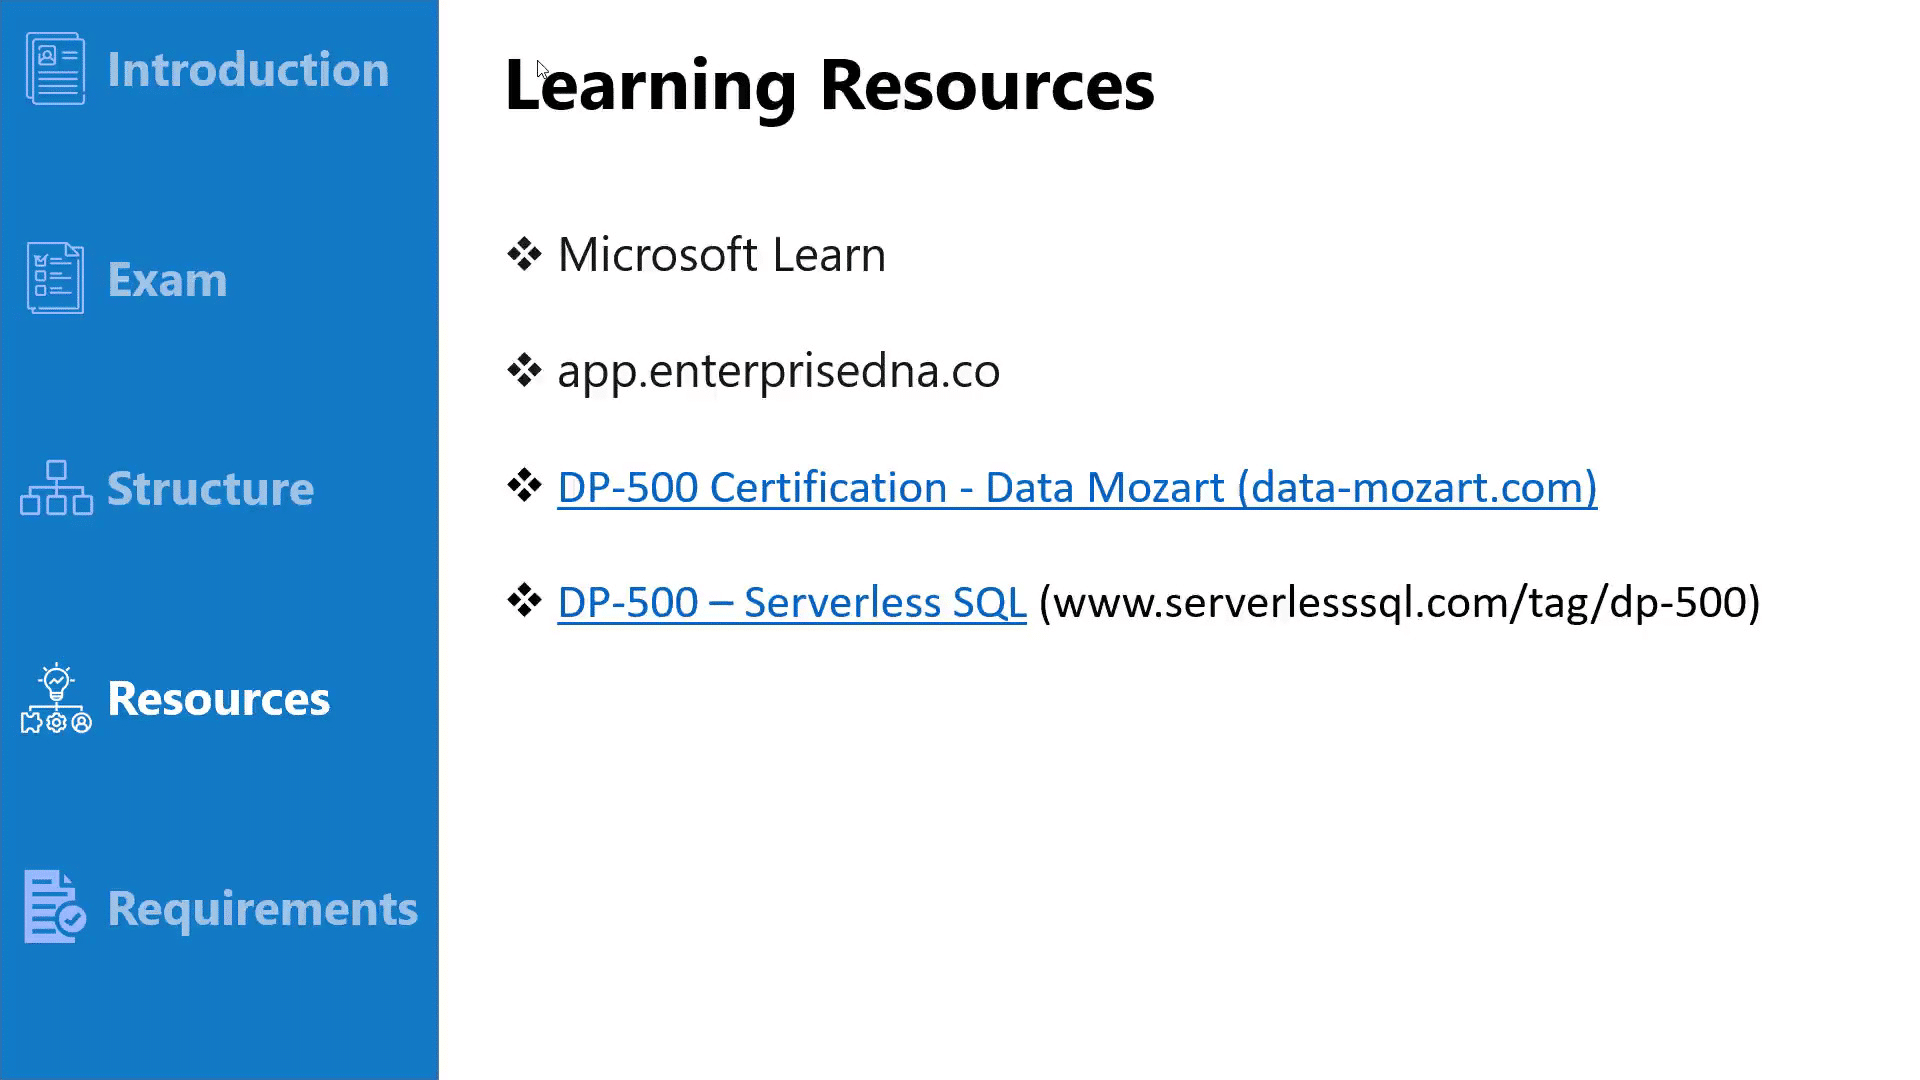 Learning resources for the DP-500 exam